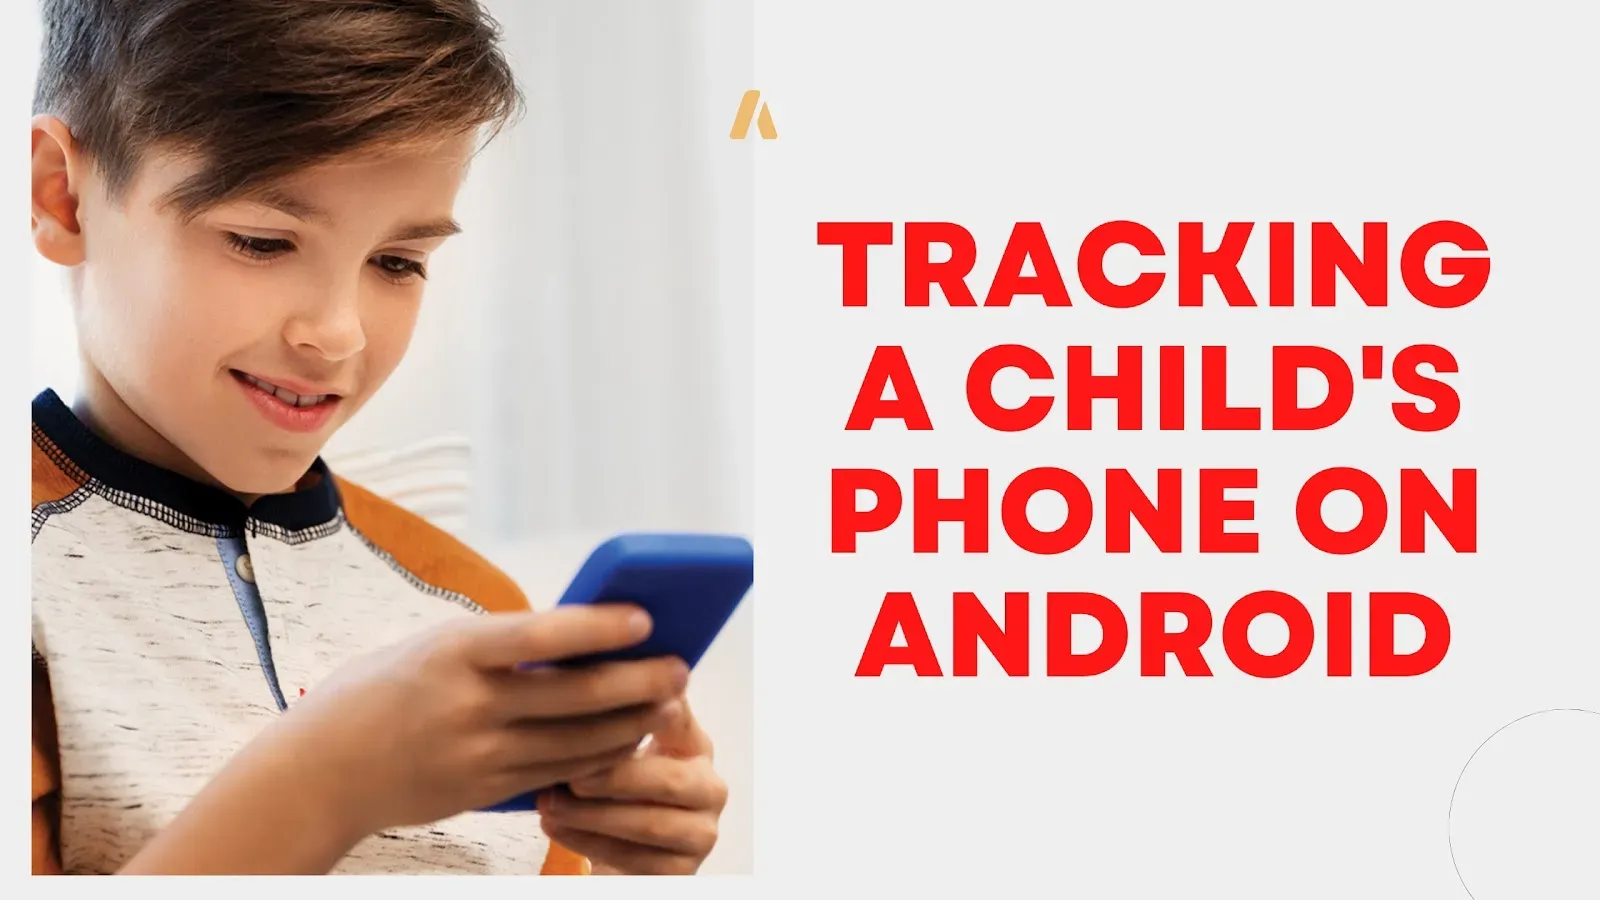 Tracking a child